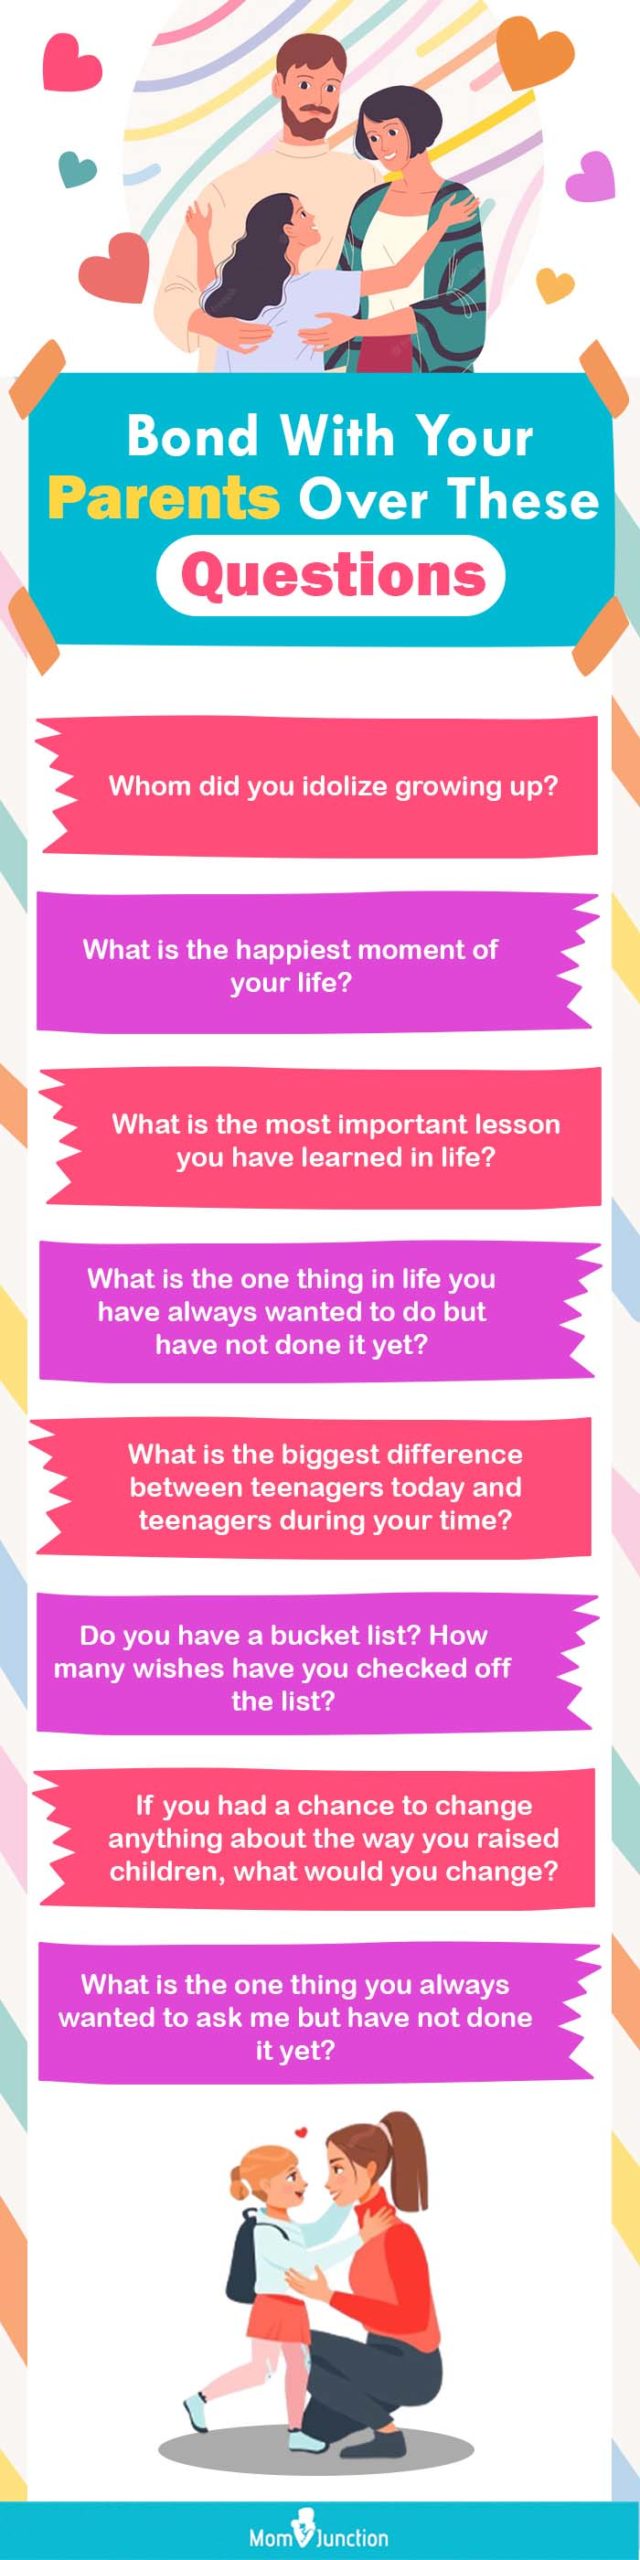 bond with your parents over these questions (infographic)